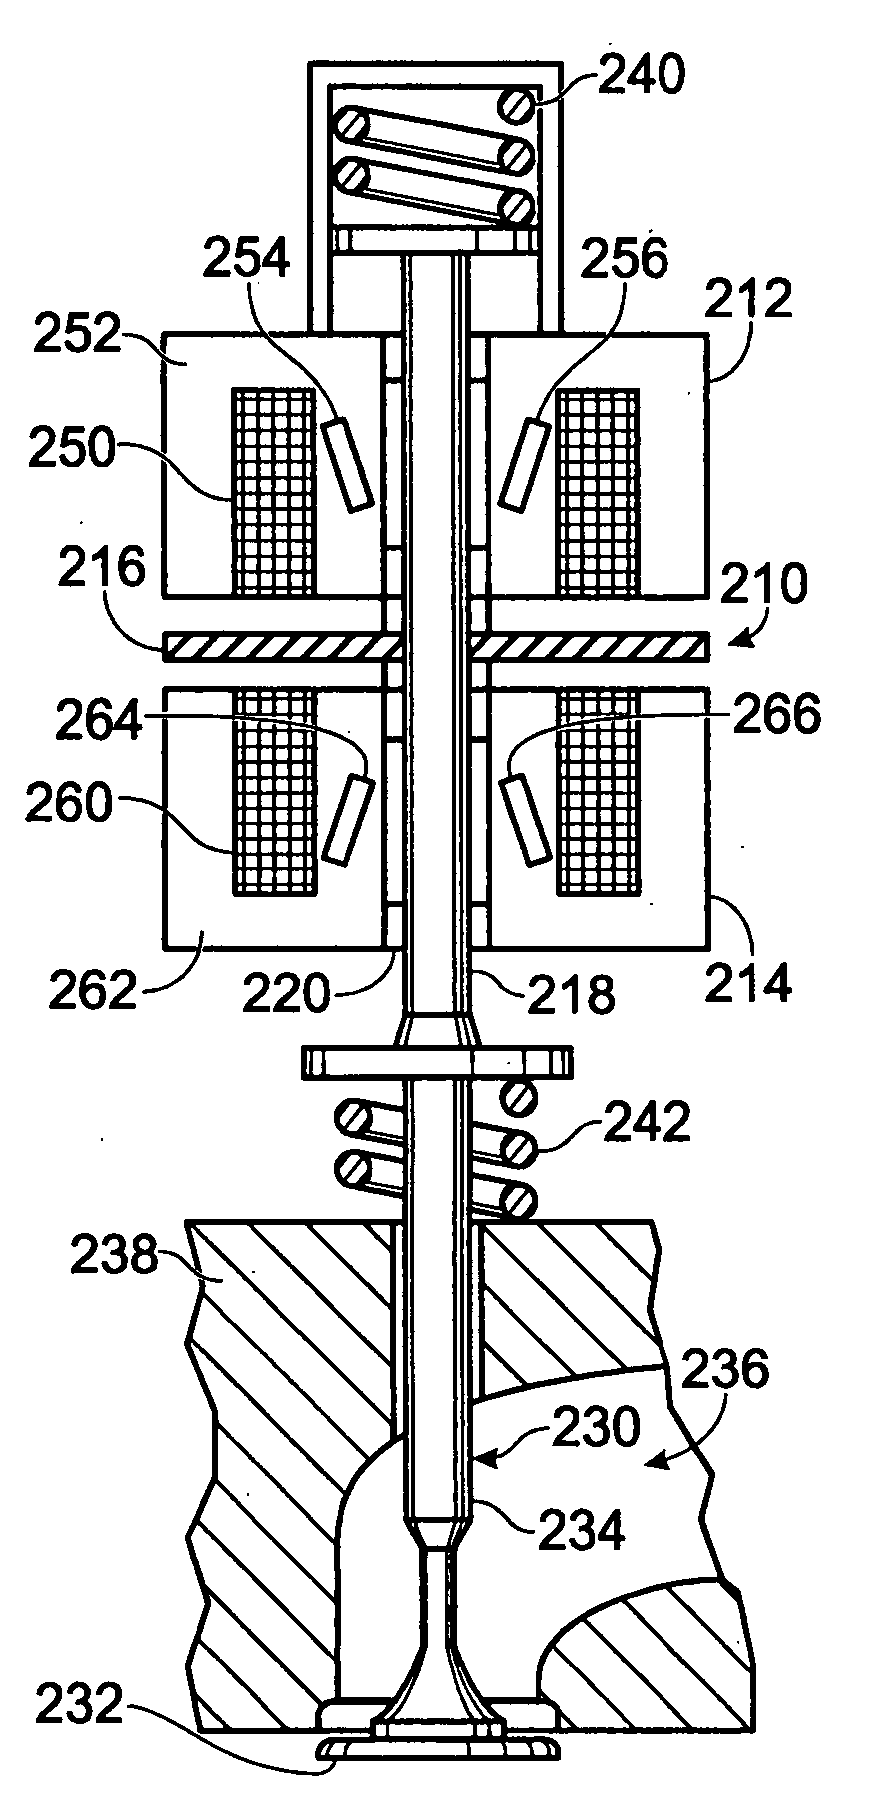 Permanent magnet electromagnetic actuator for an electronic valve actuation system of an engine